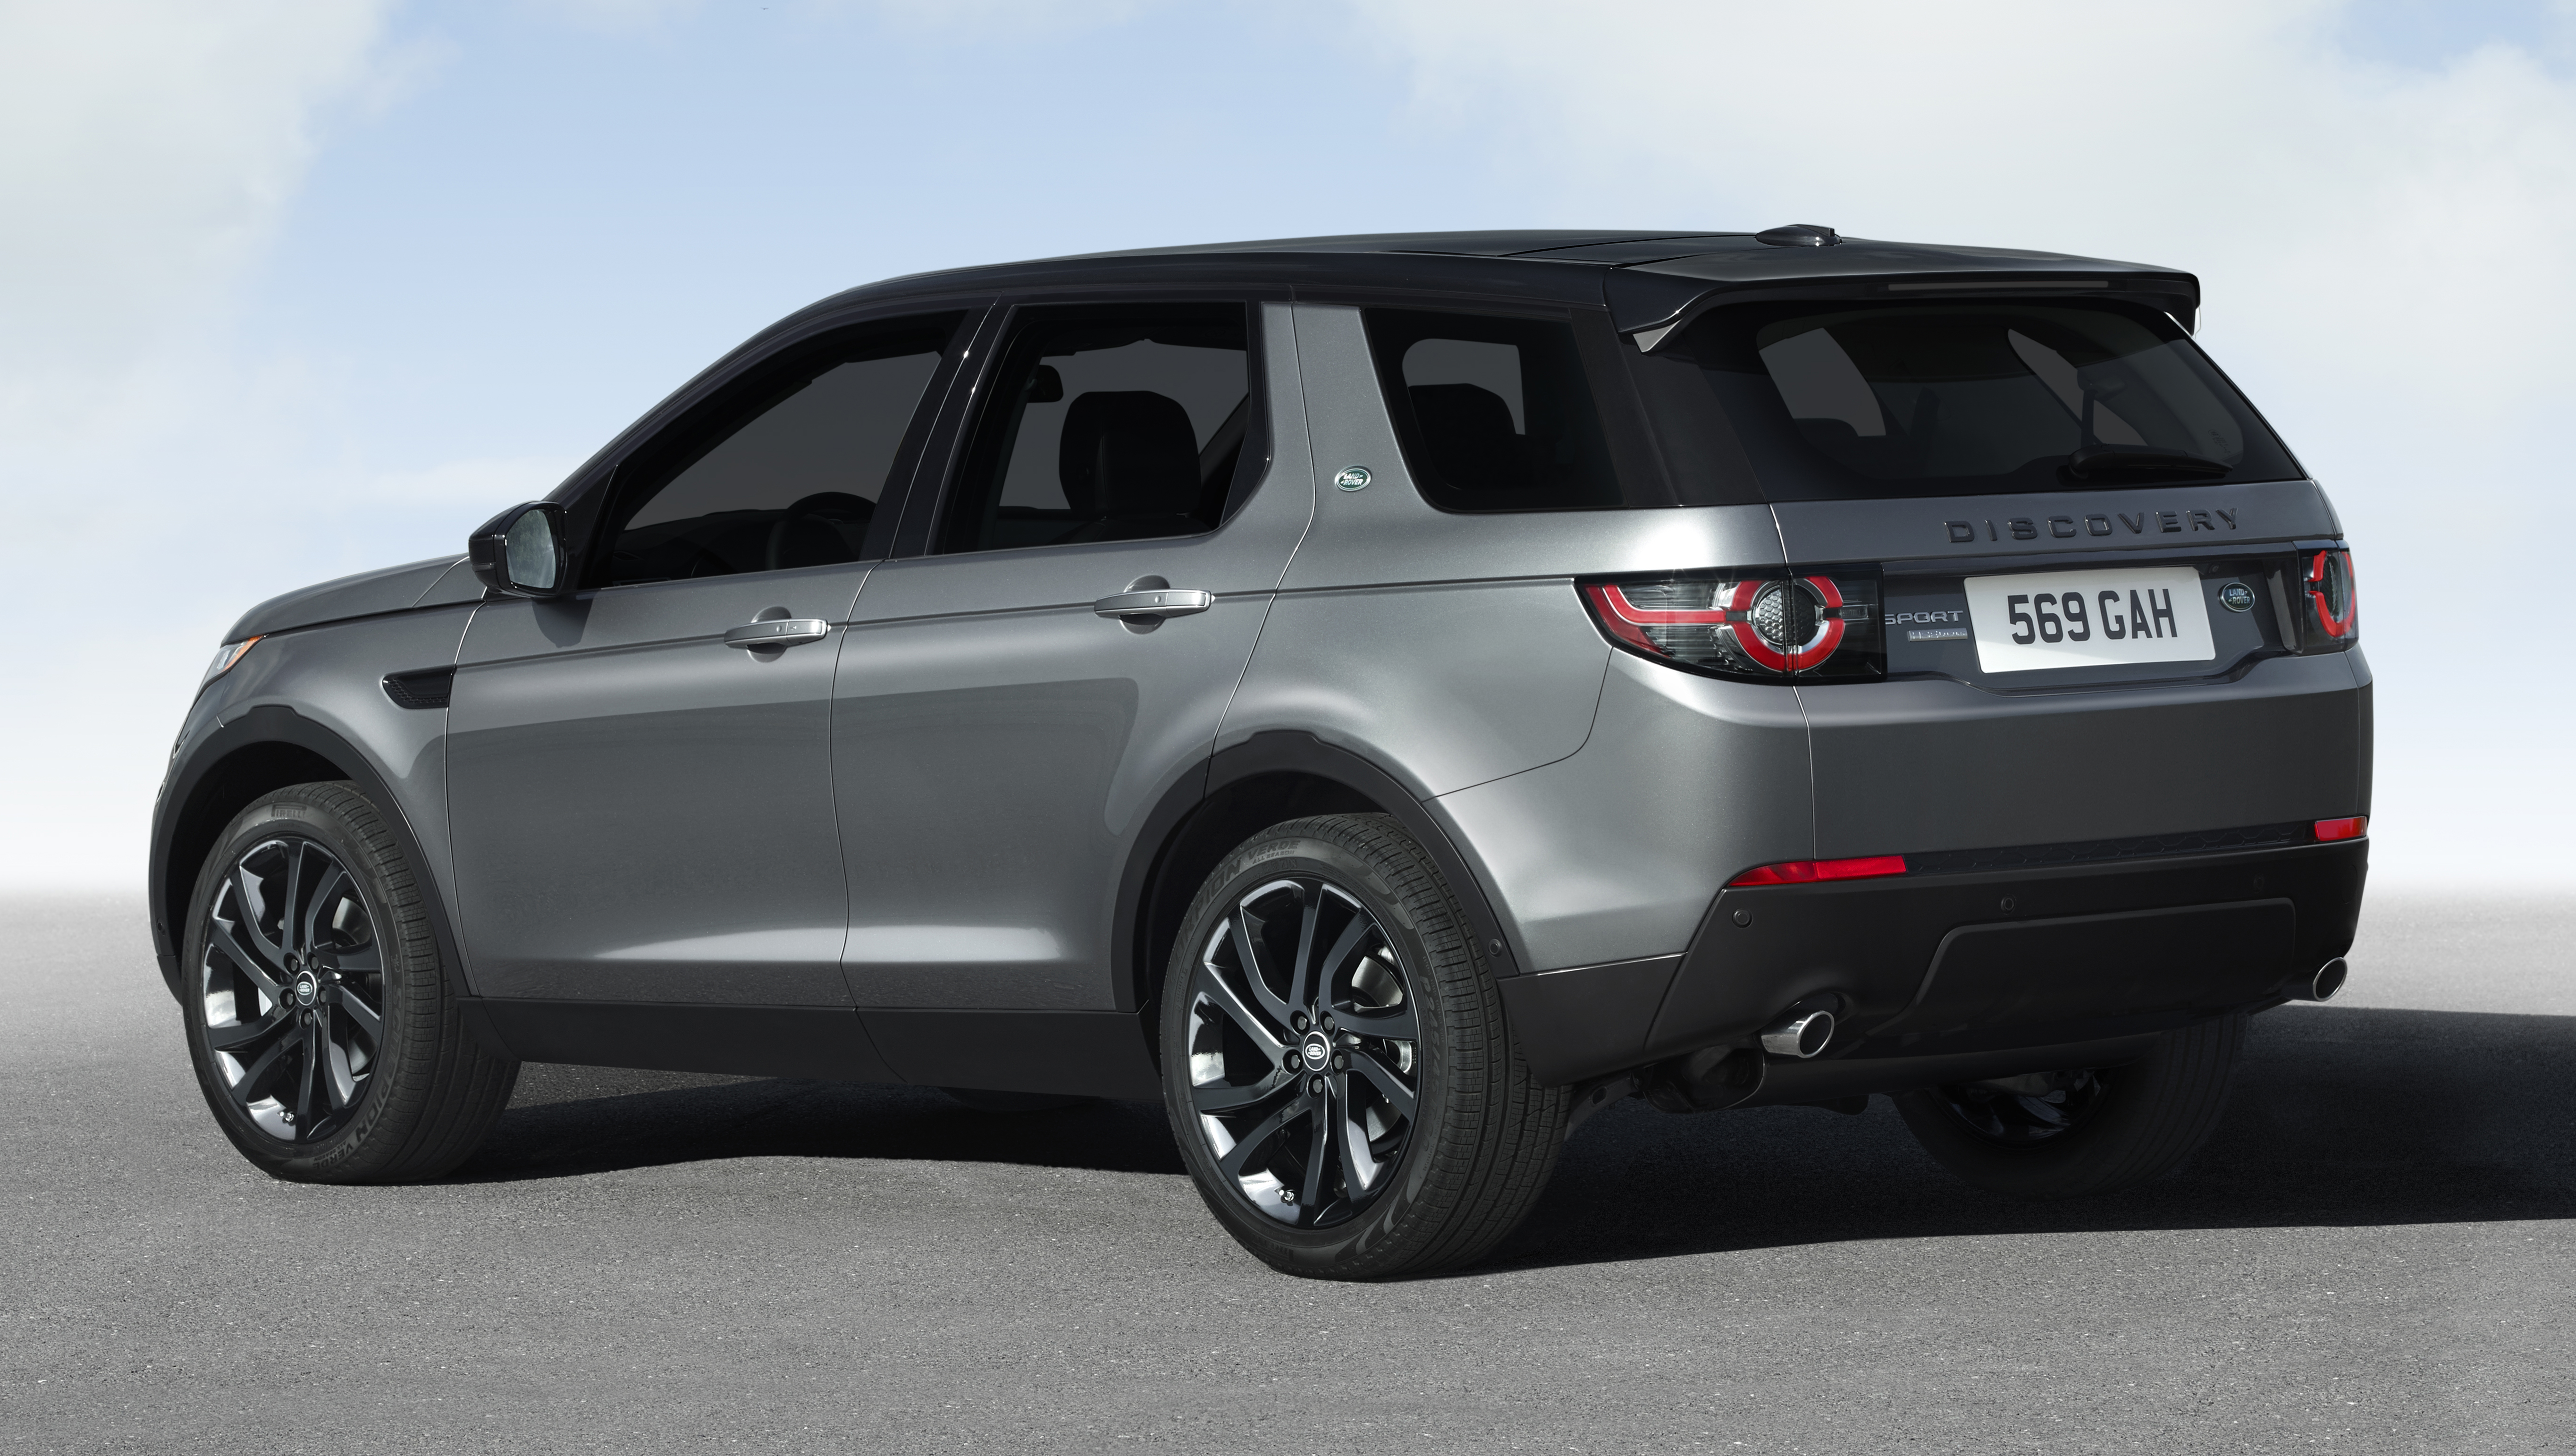 The new Land Rover Discovery Sport goes on sale